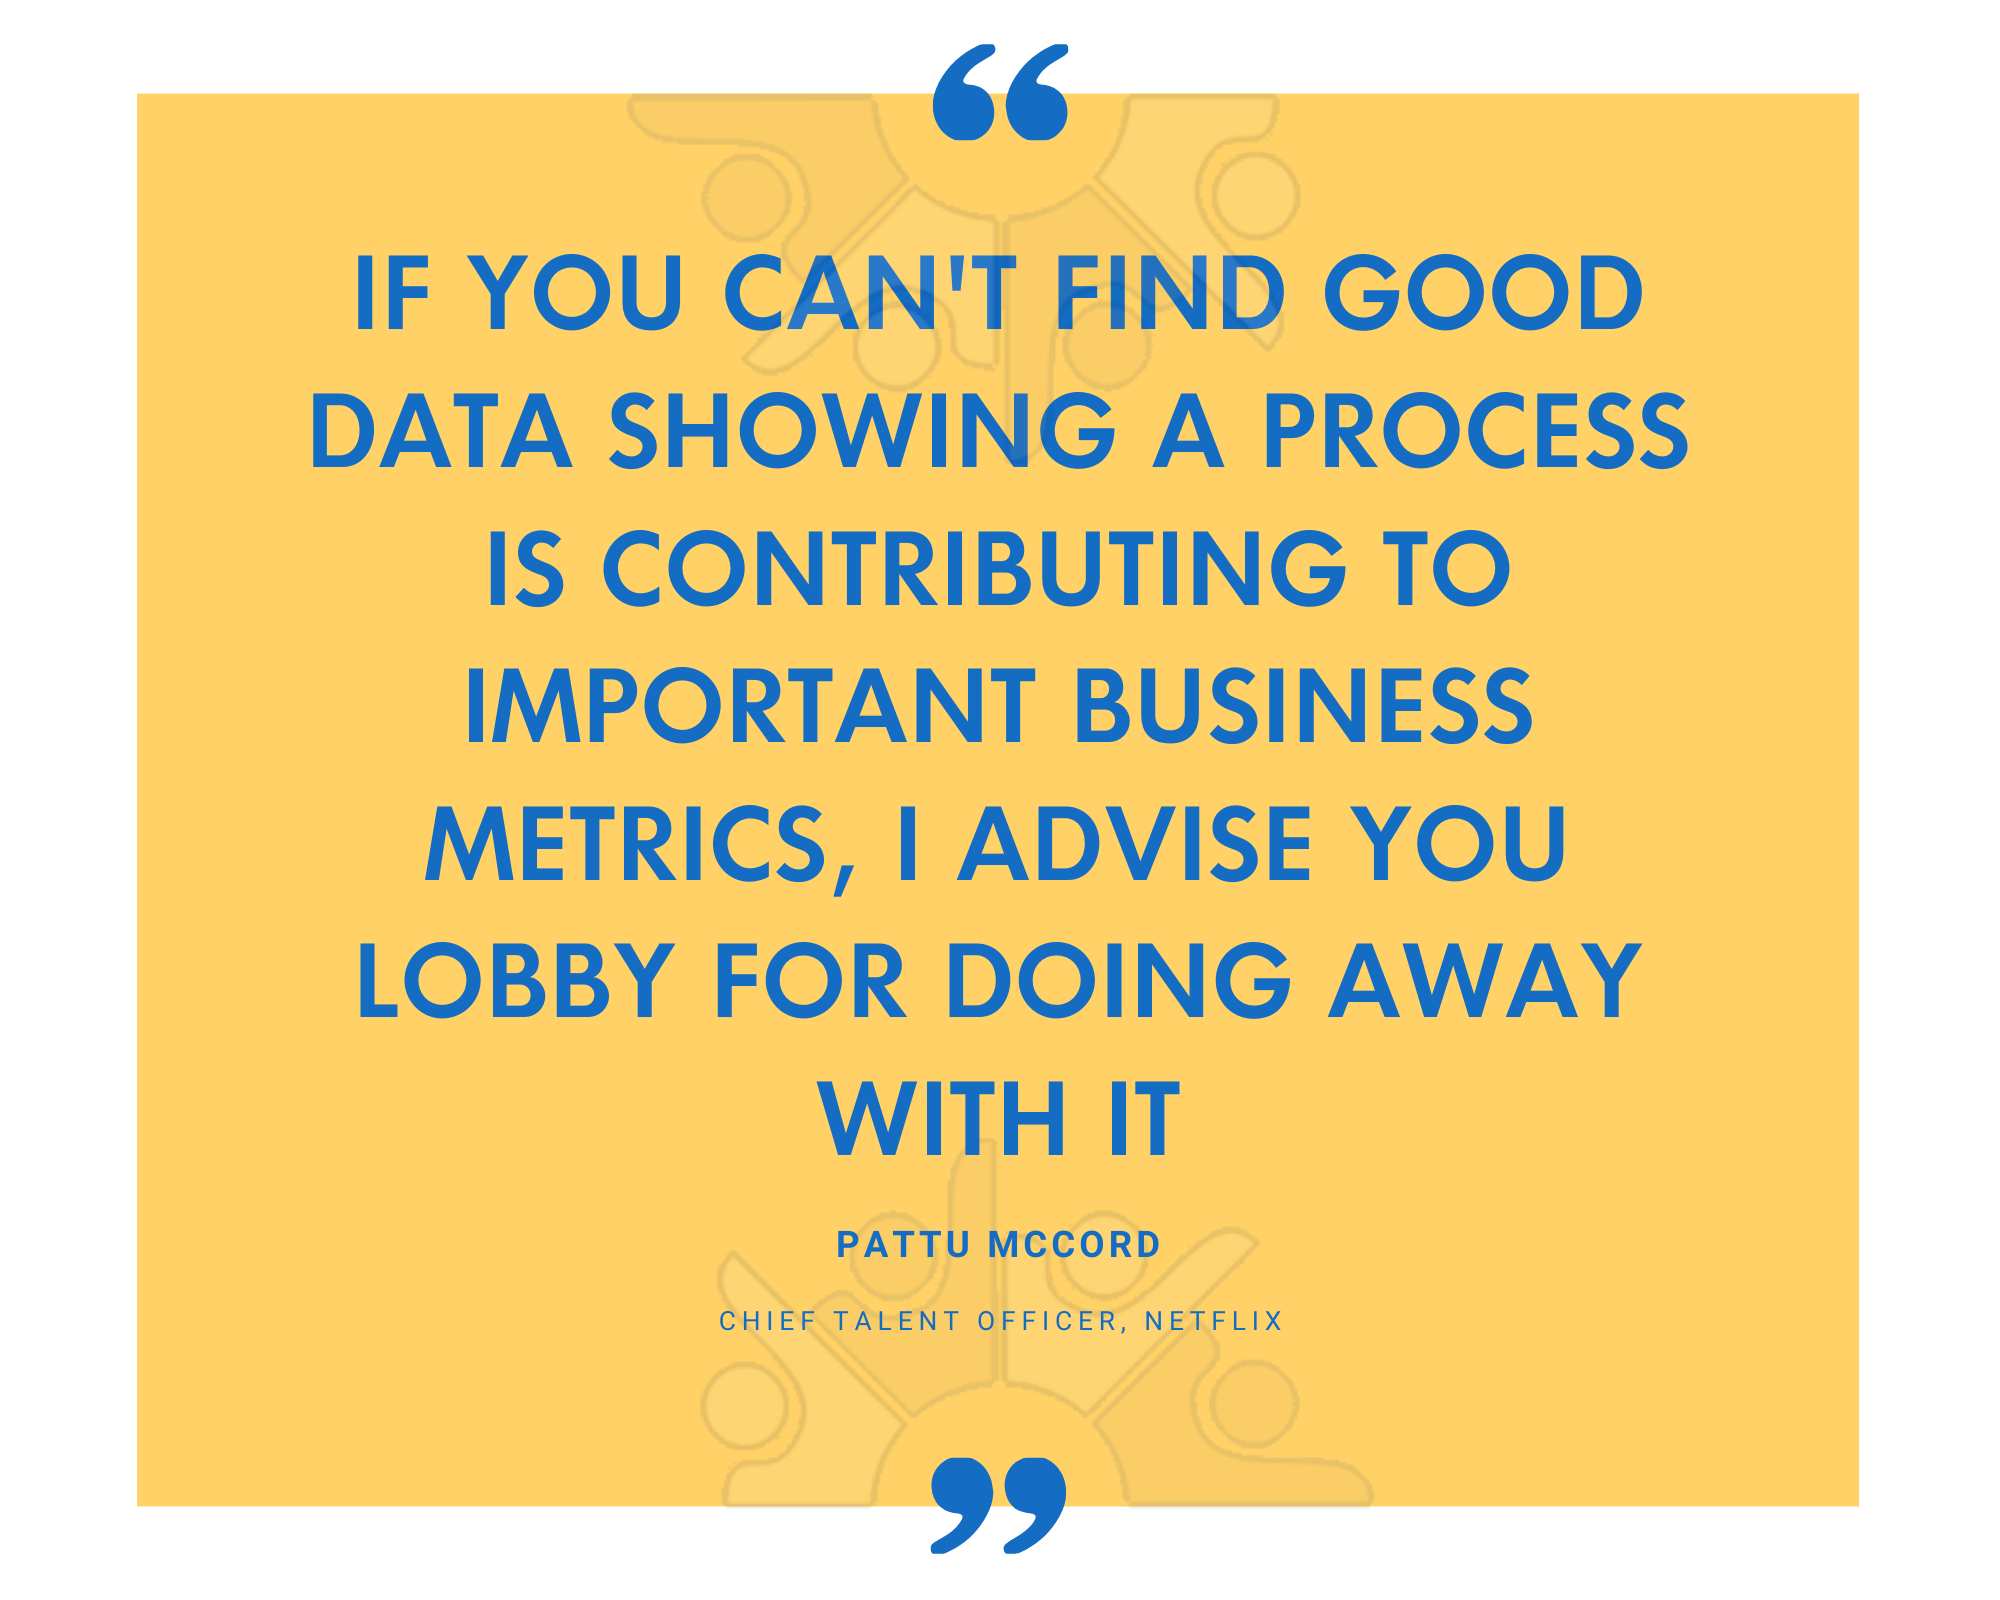 QUOTE if you cant find good data showing a process is contributing to important business metrics